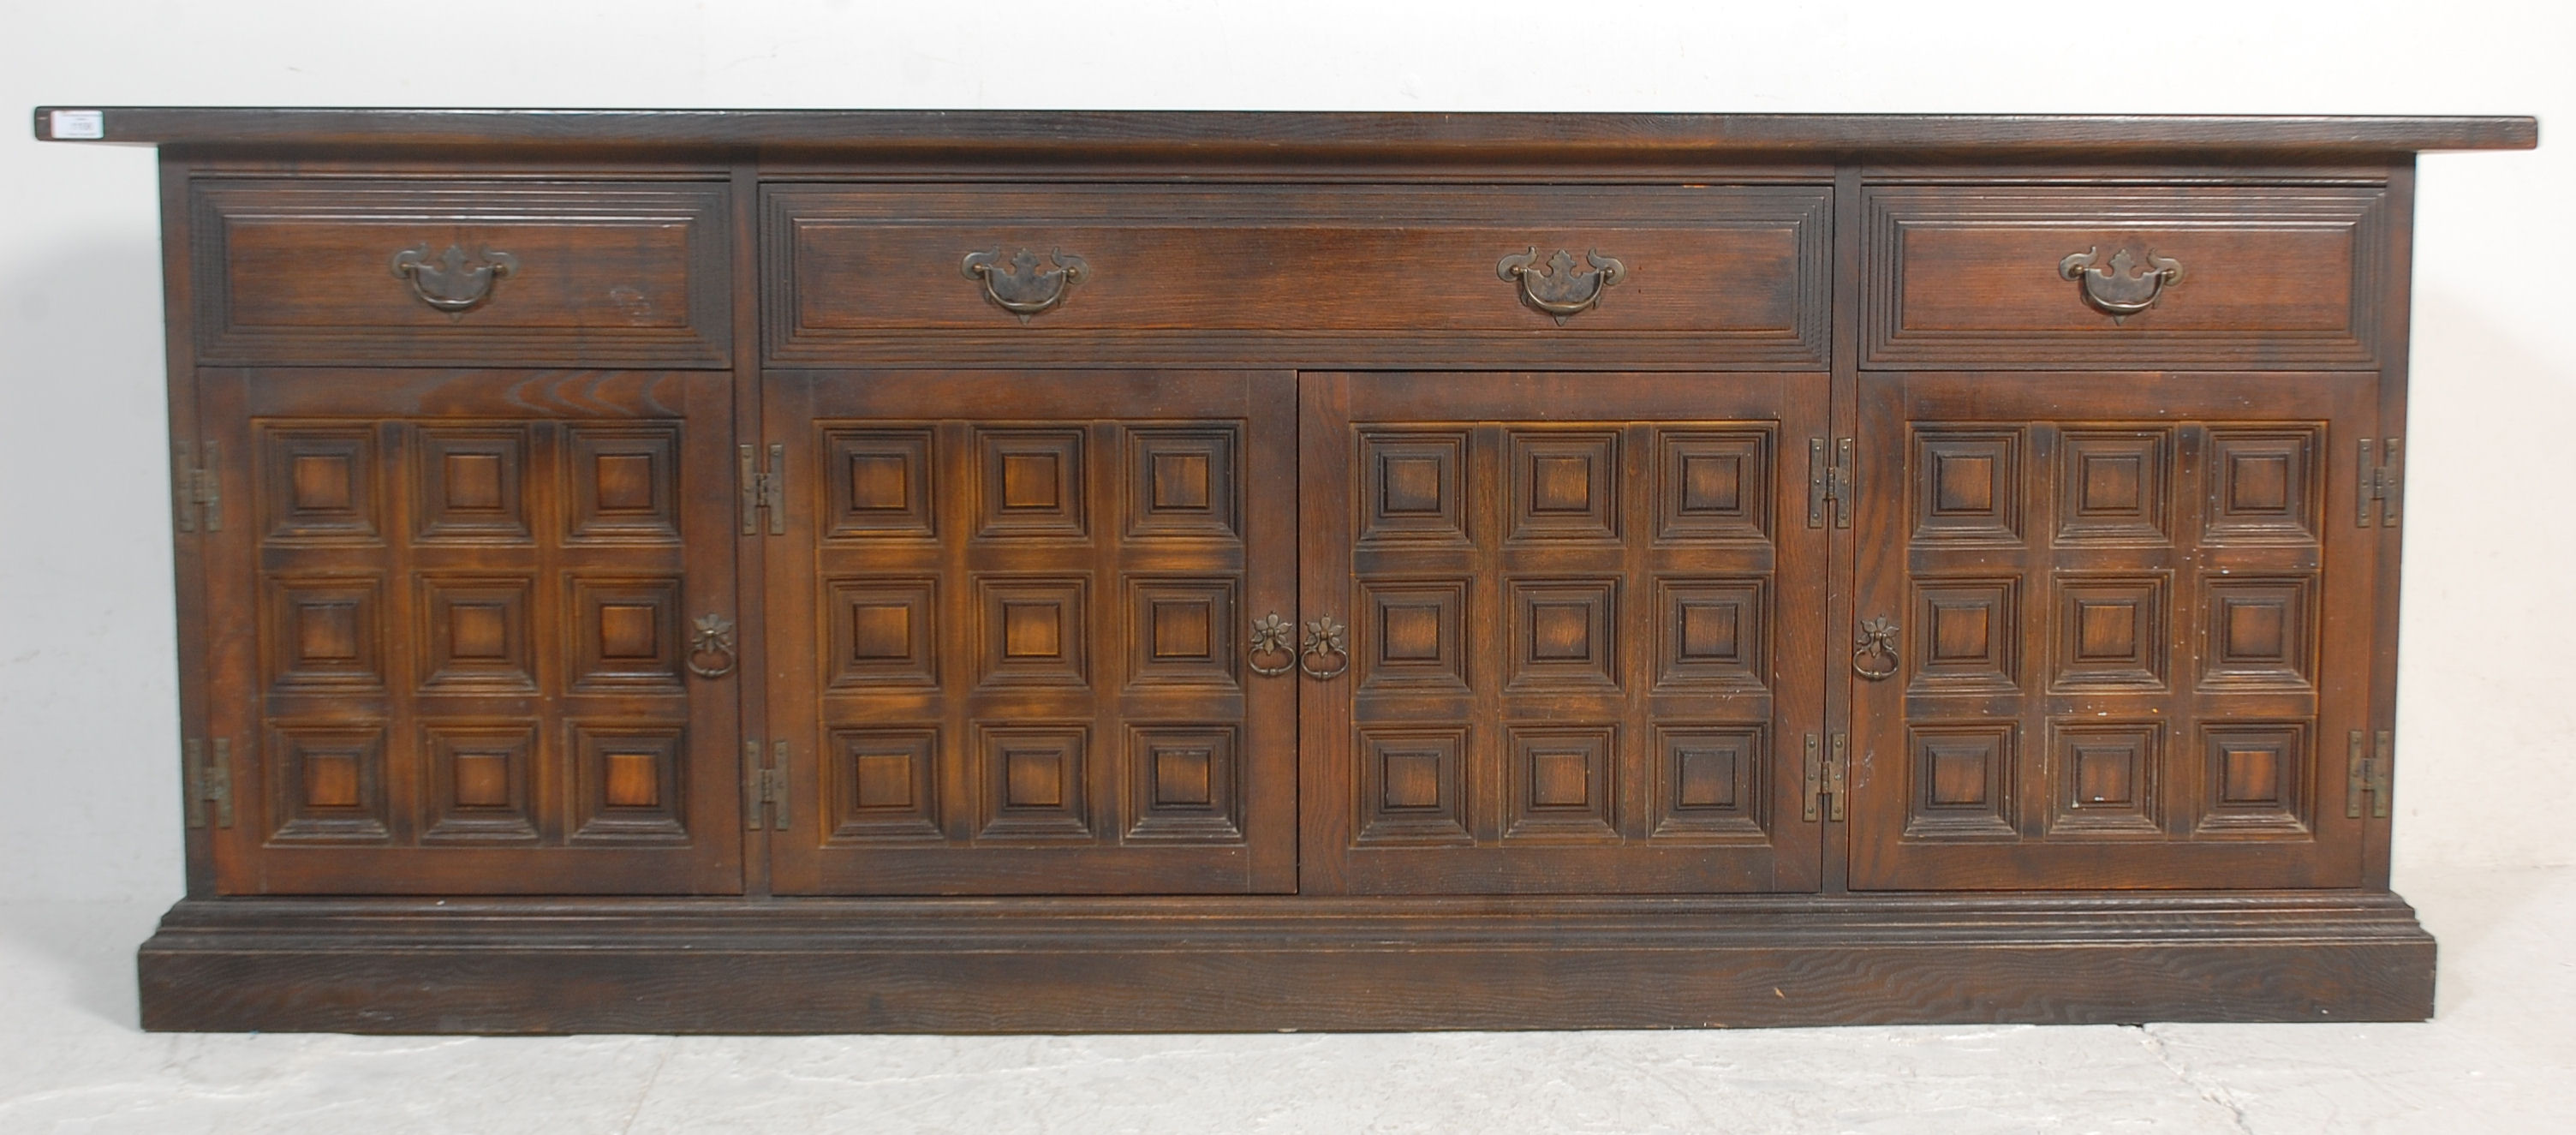 A mid century Spanish influence large carved oak sideboard / dresser base with portcullis relief - Image 3 of 9